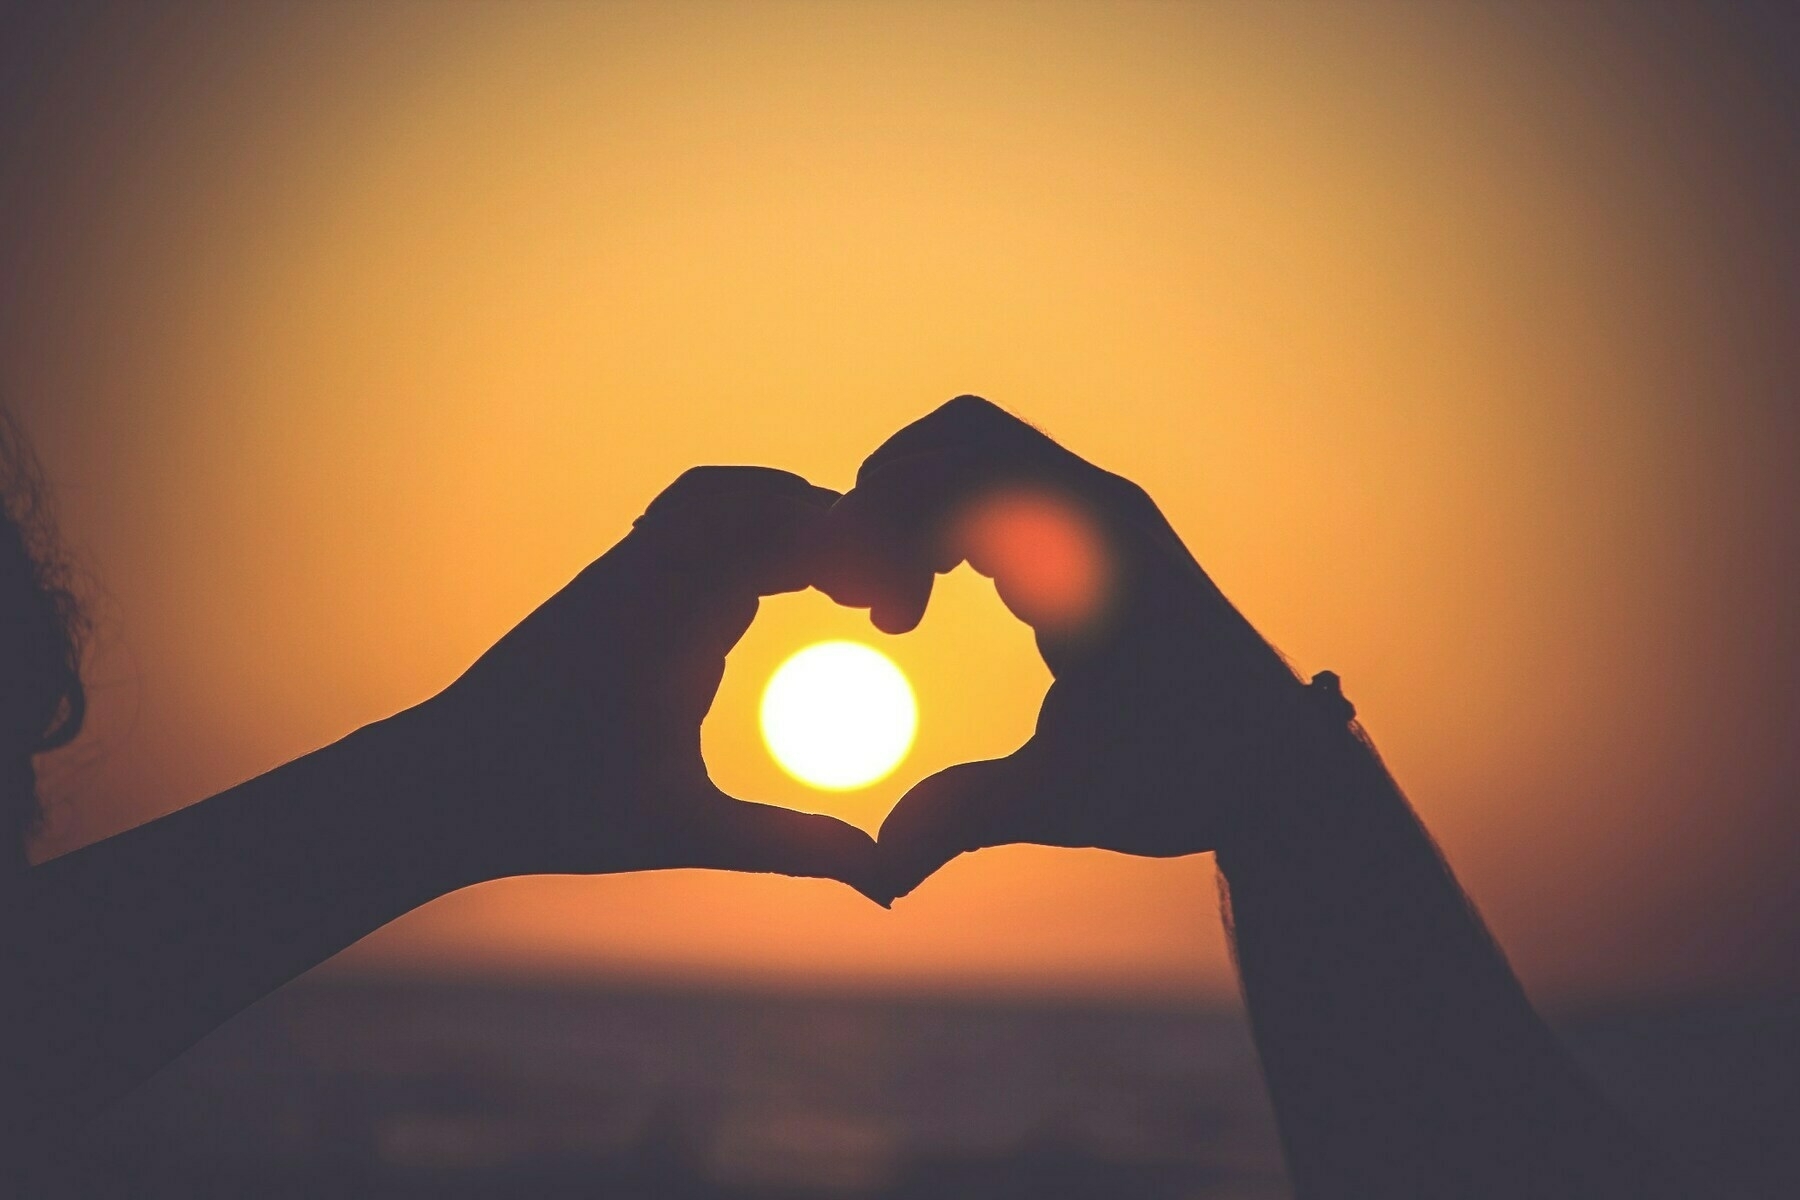 hands making a heart shape with a low, yellow sun framed in the background